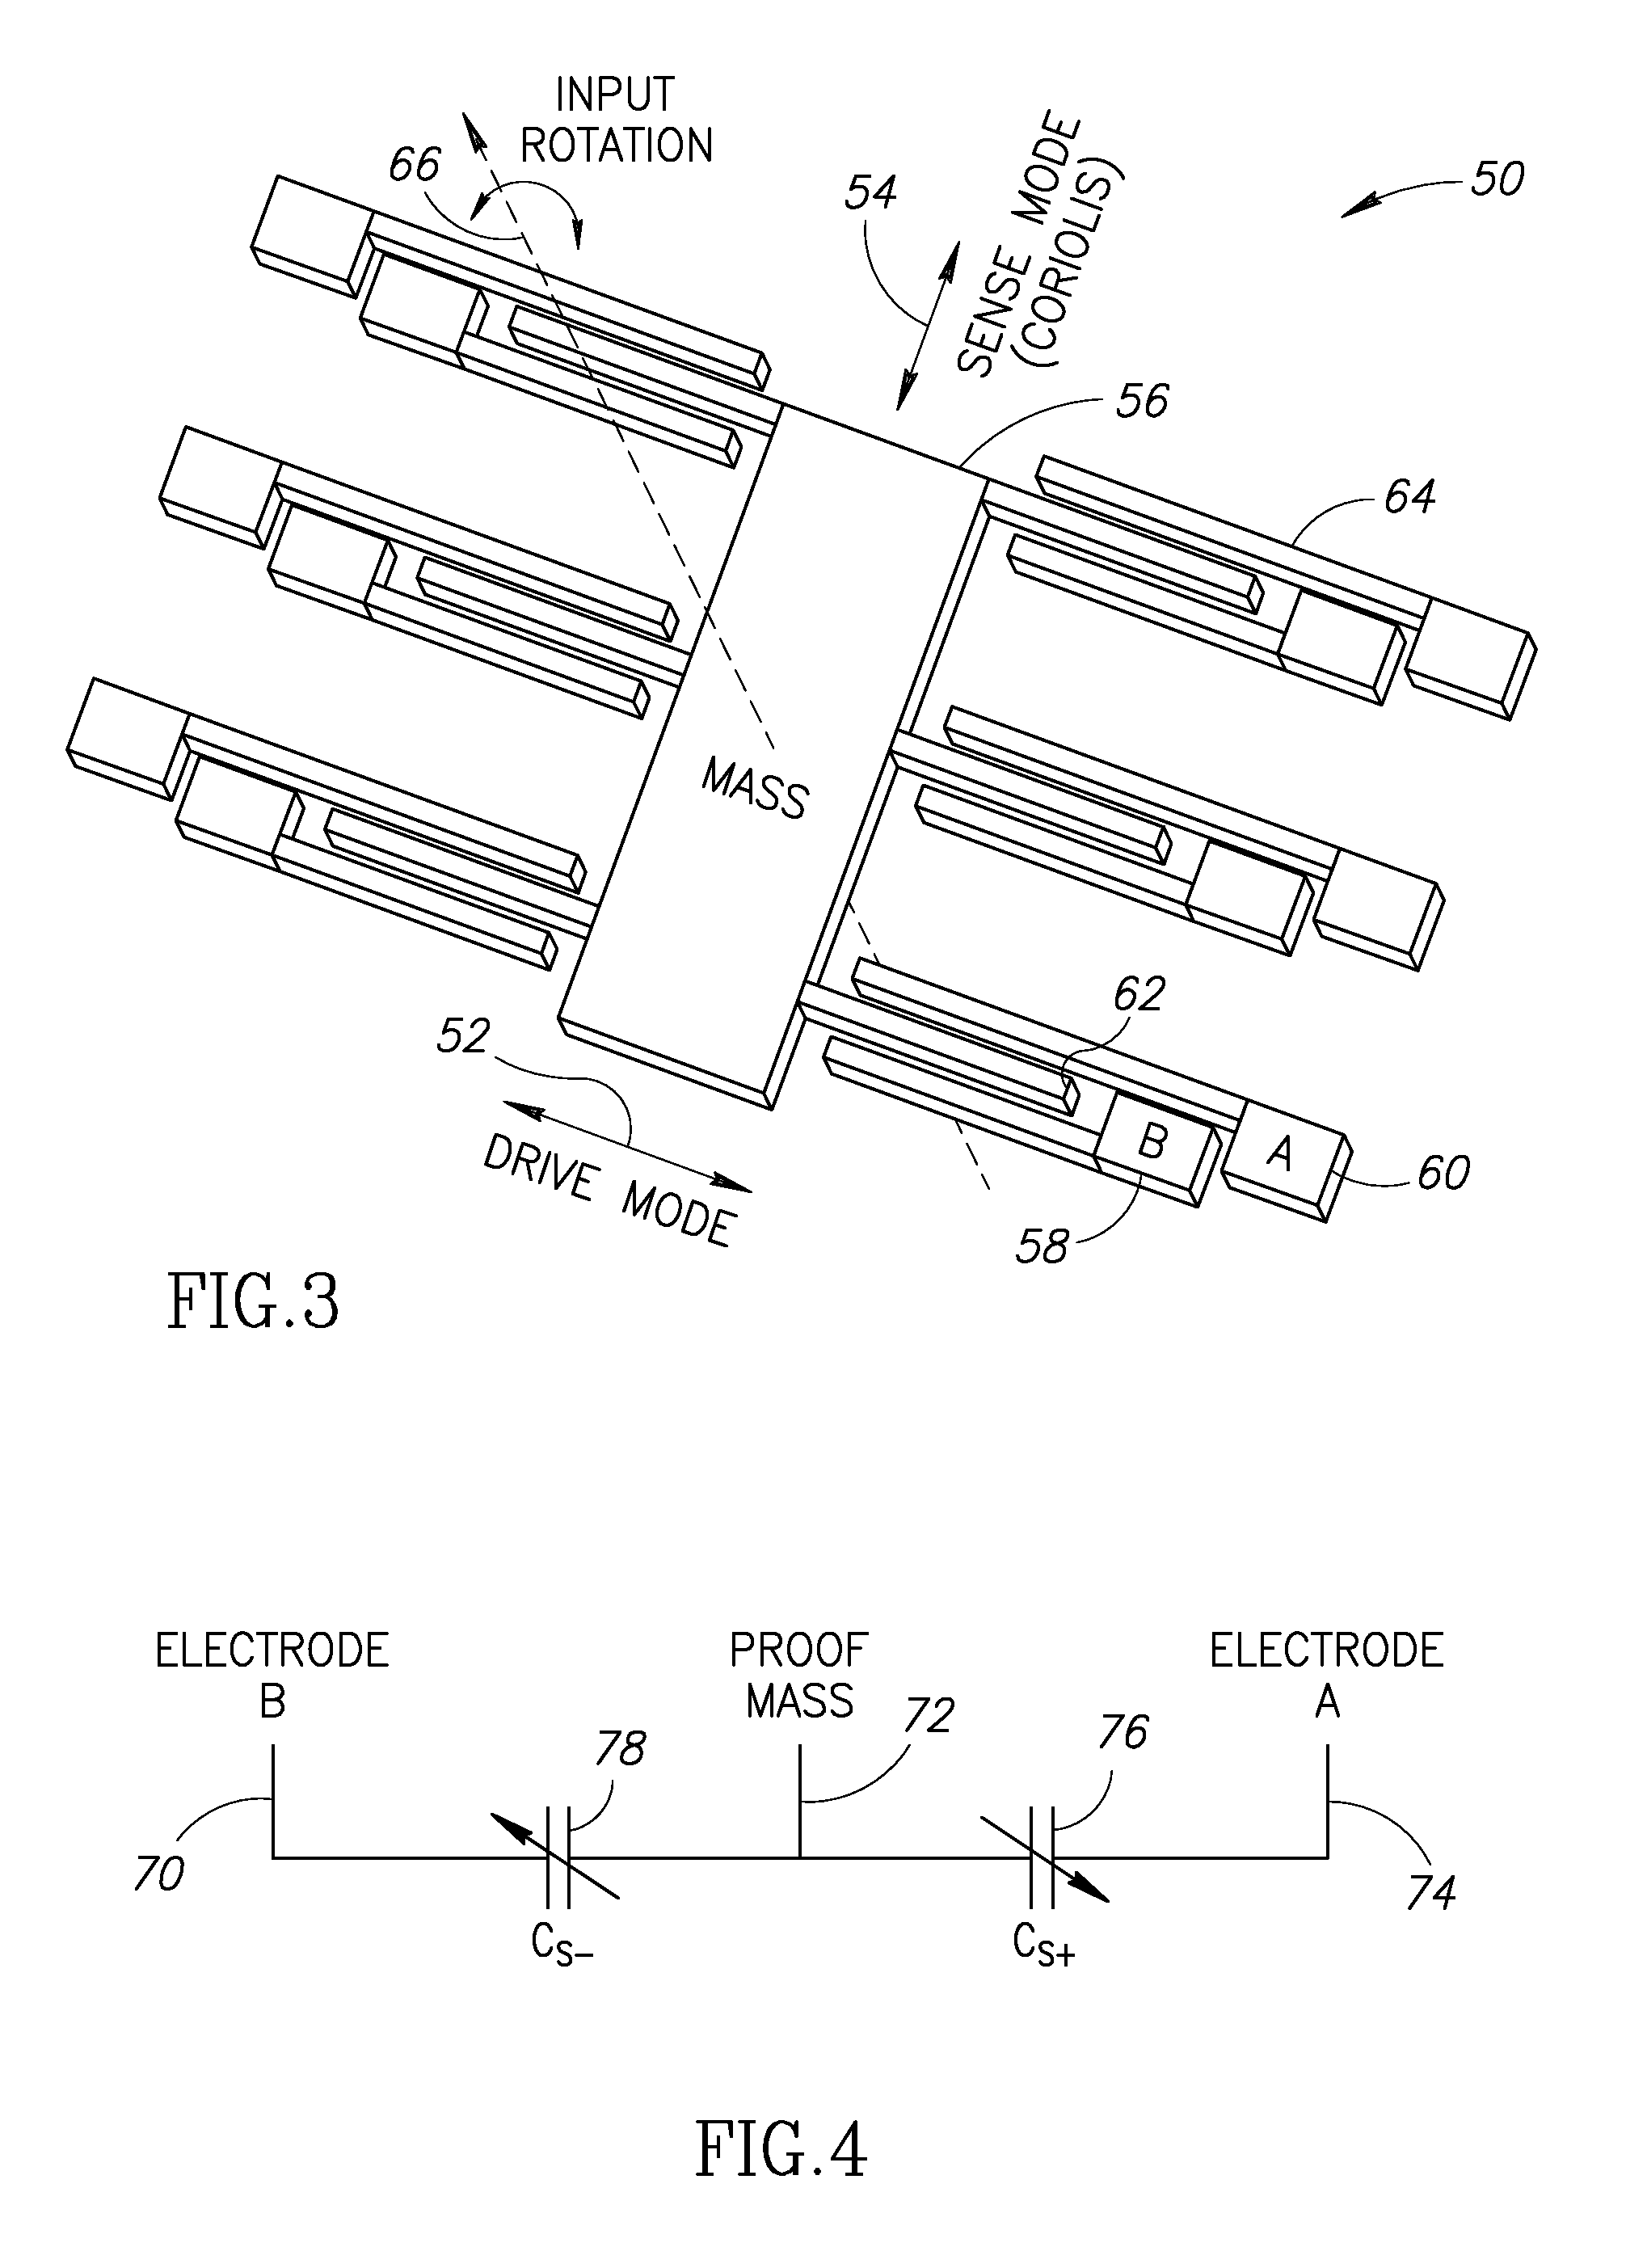 Sagnac effect based radio frequency electronic gyroscope incorporated in CMOS integrated circuit